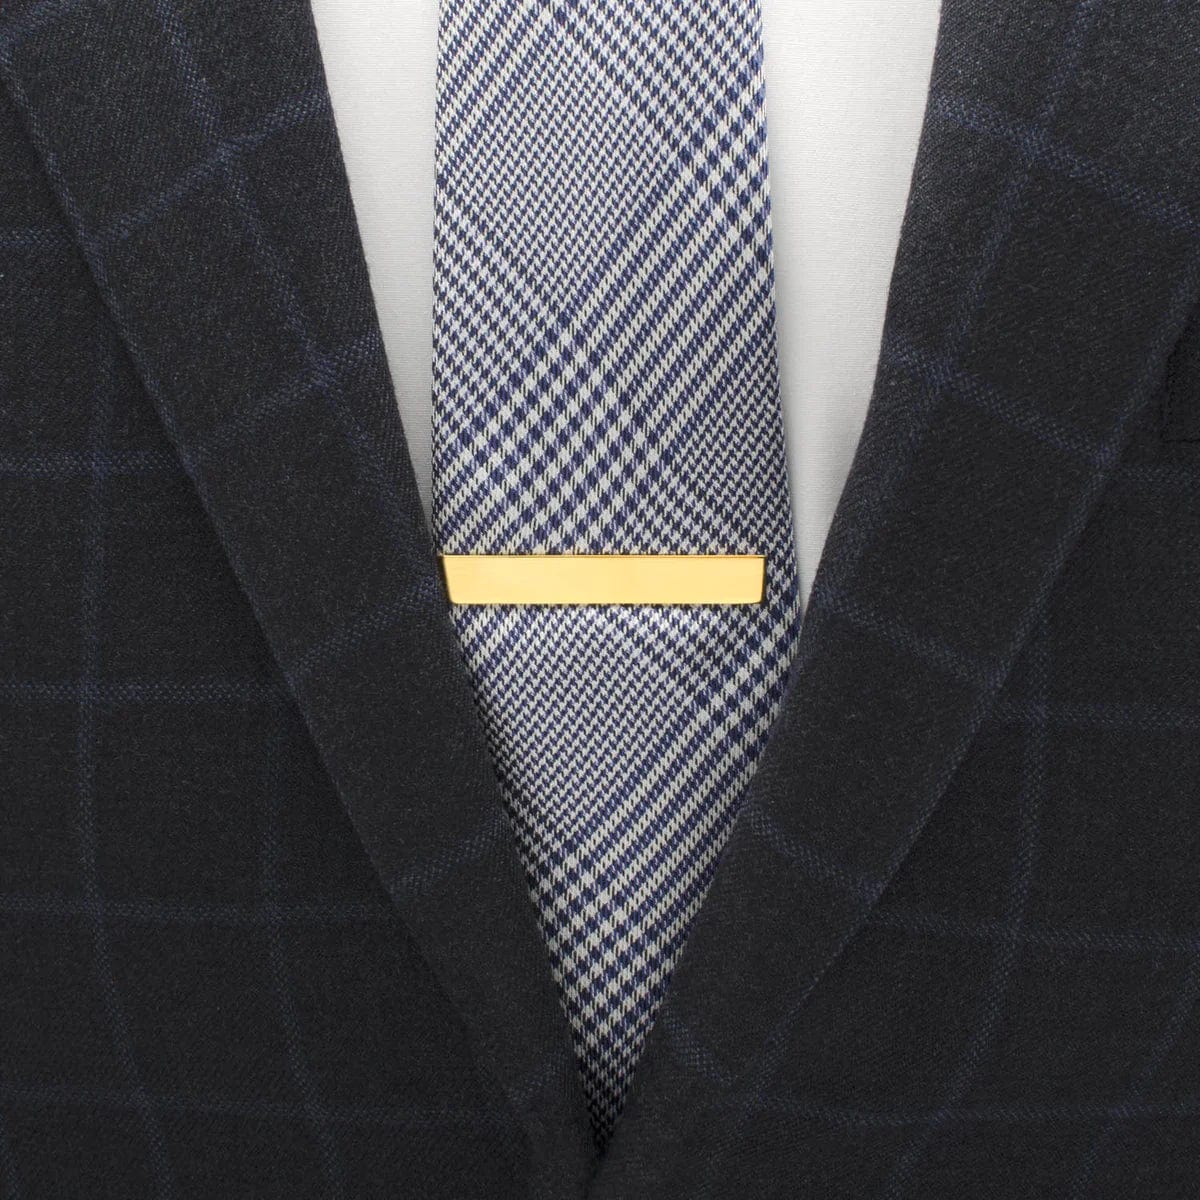 Ox & Bull Trading Co Men's Accessories Gold Ox & Bull - Gold Plated Tie Bar